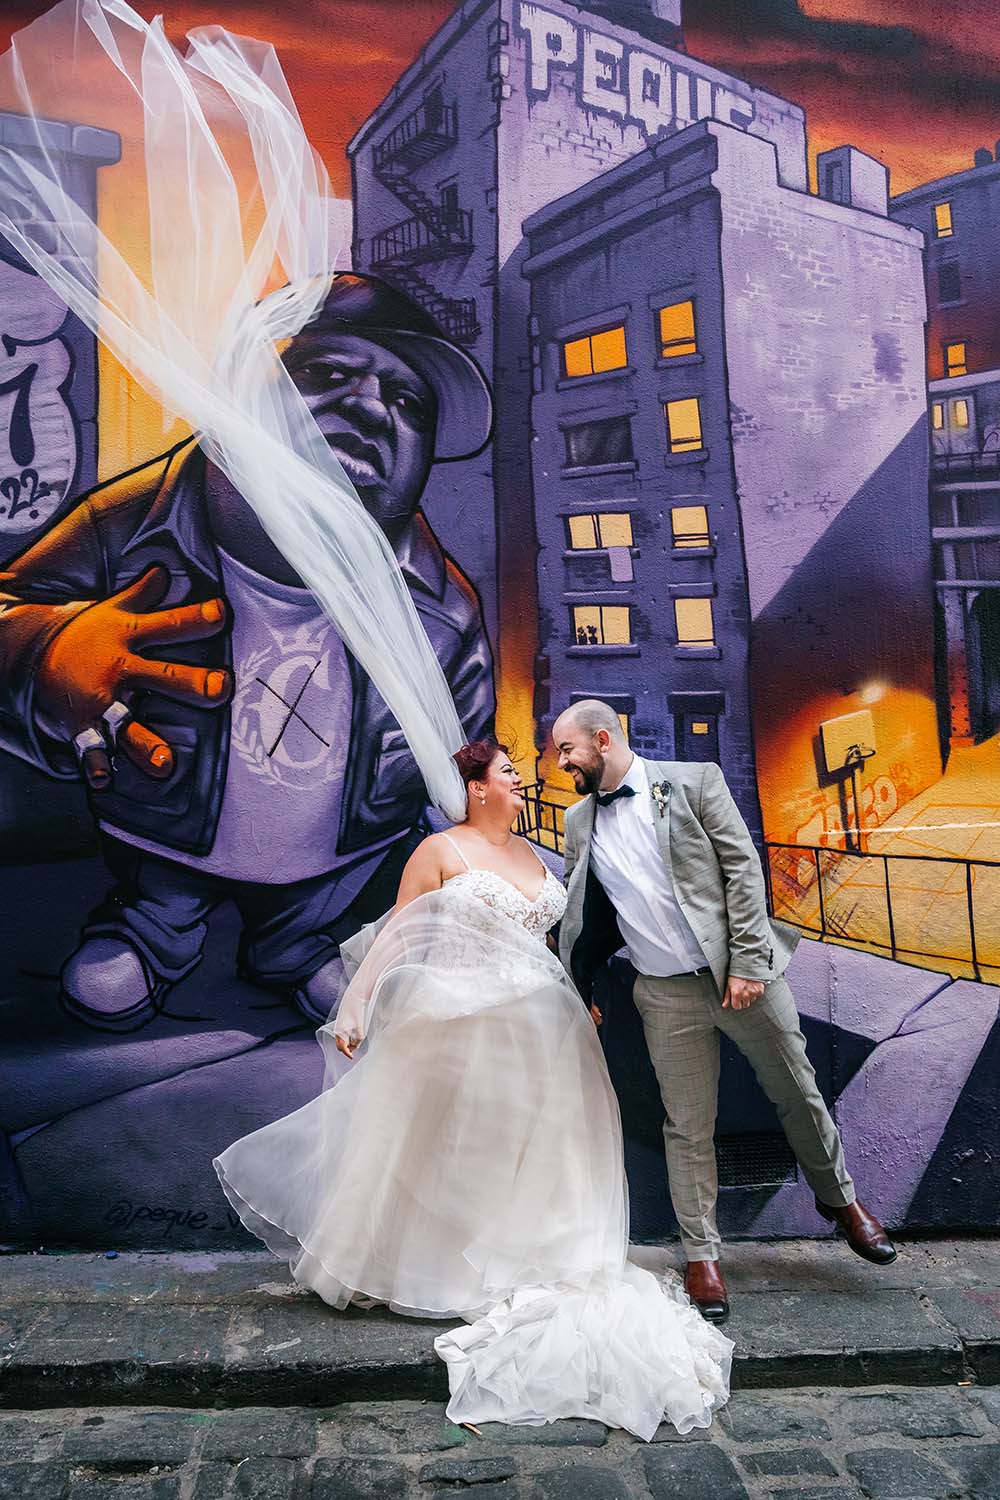 Destination Wedding Photography - Bride and Groom with Street Graffiti